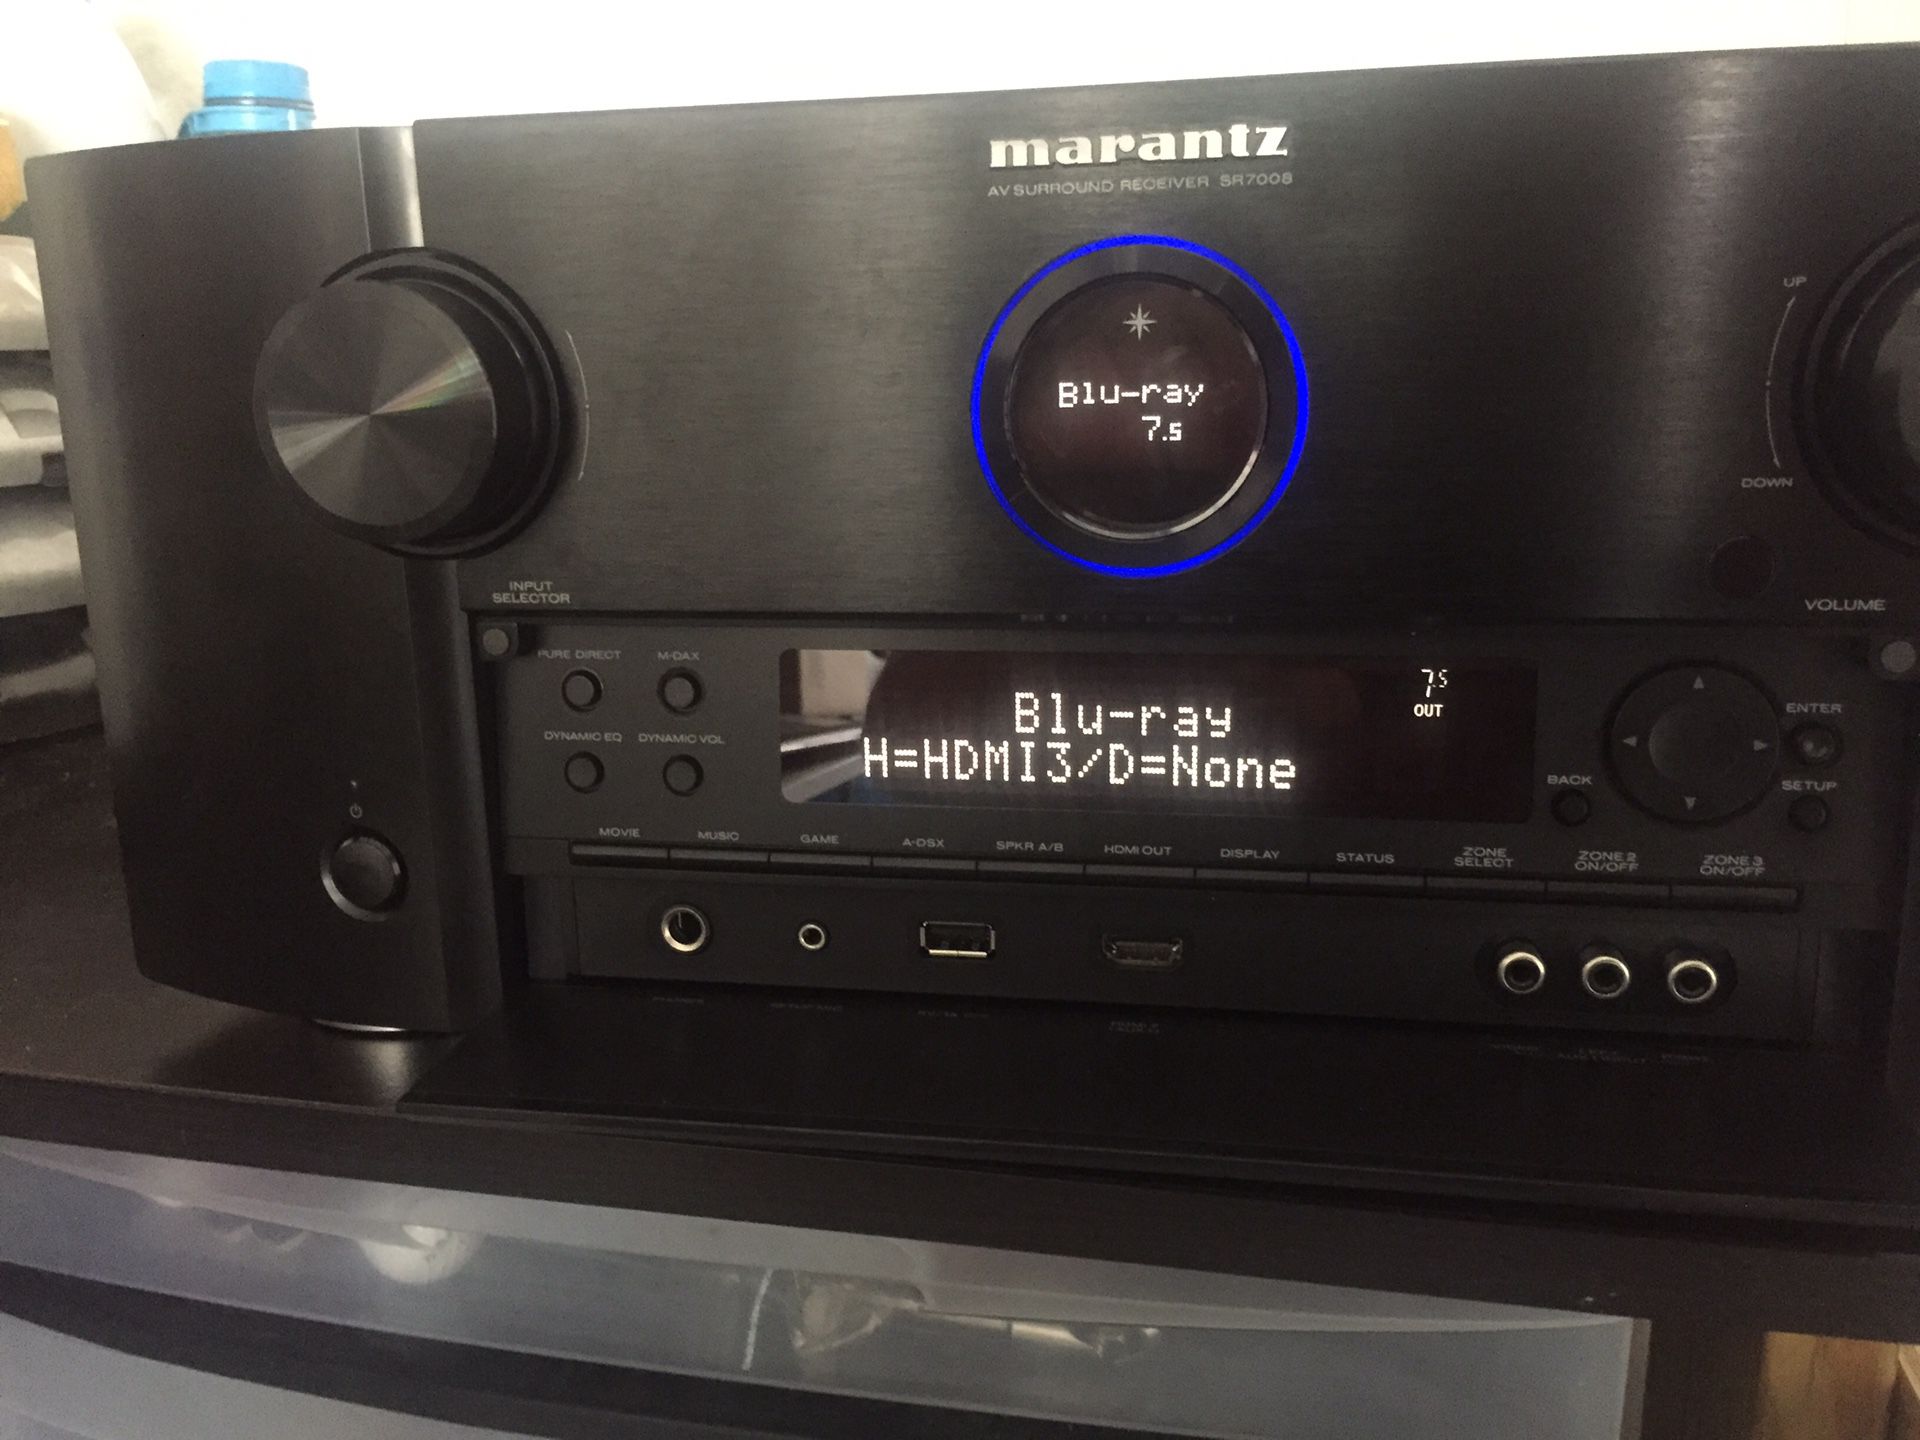 Marantz sr7008 , no longer has any image or sound (for parts or someone who knows how to fix it)